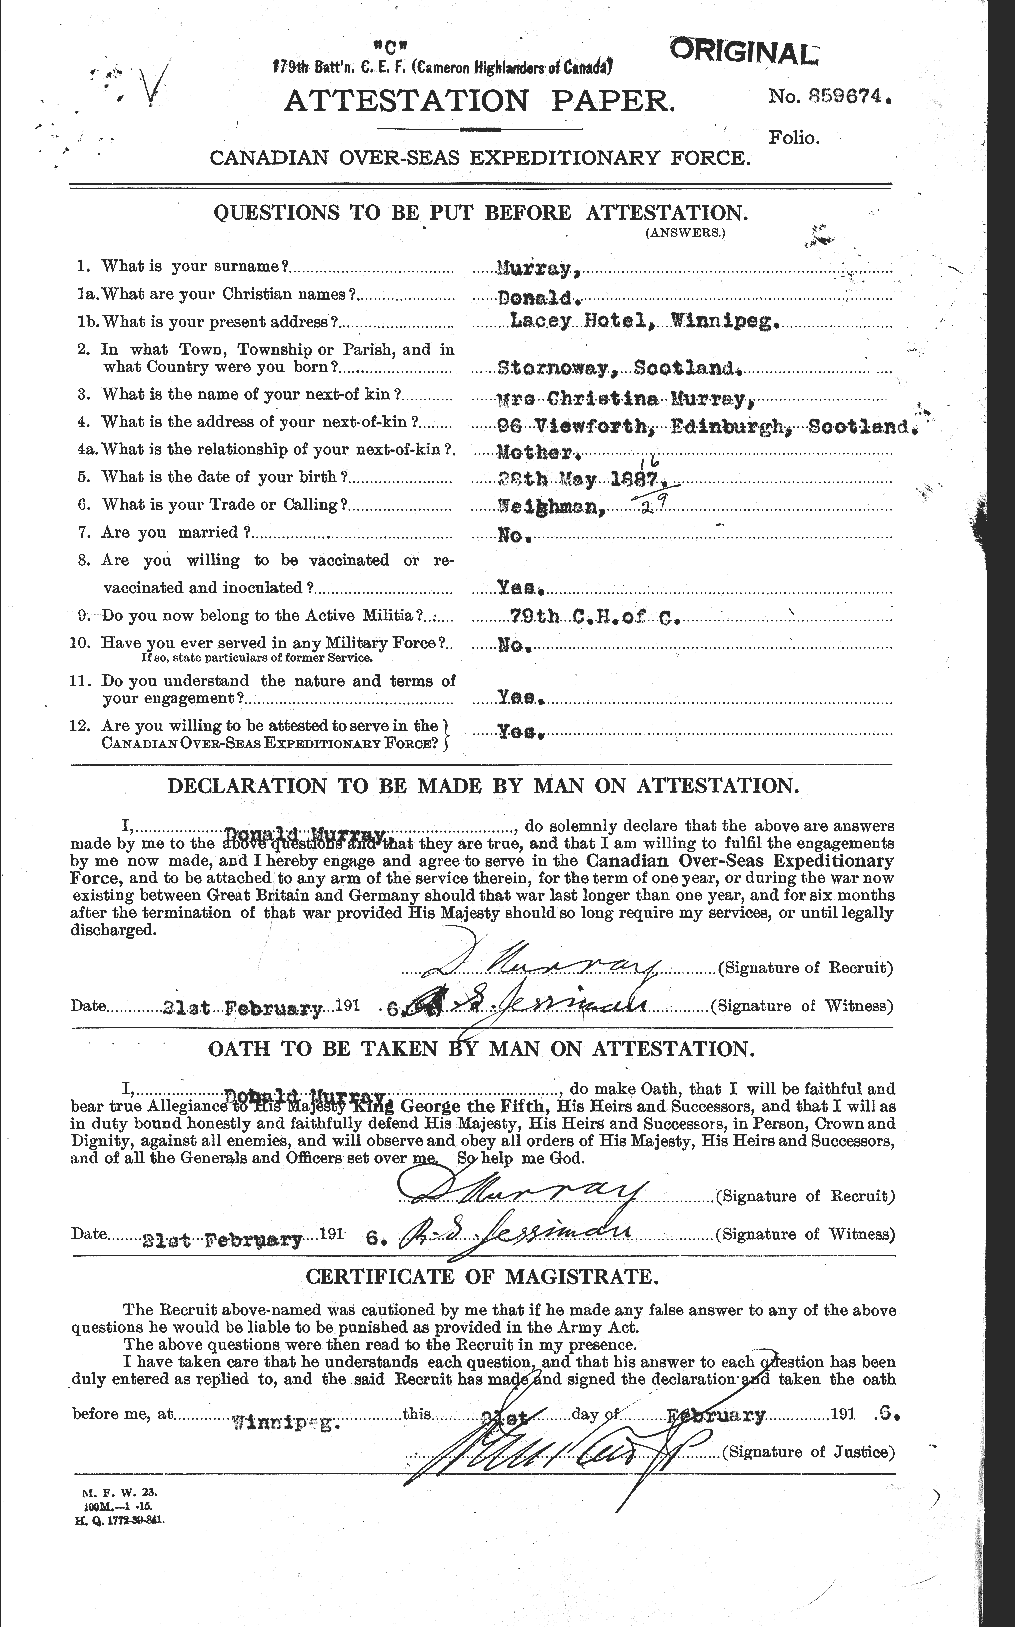 Personnel Records of the First World War - CEF 517722a